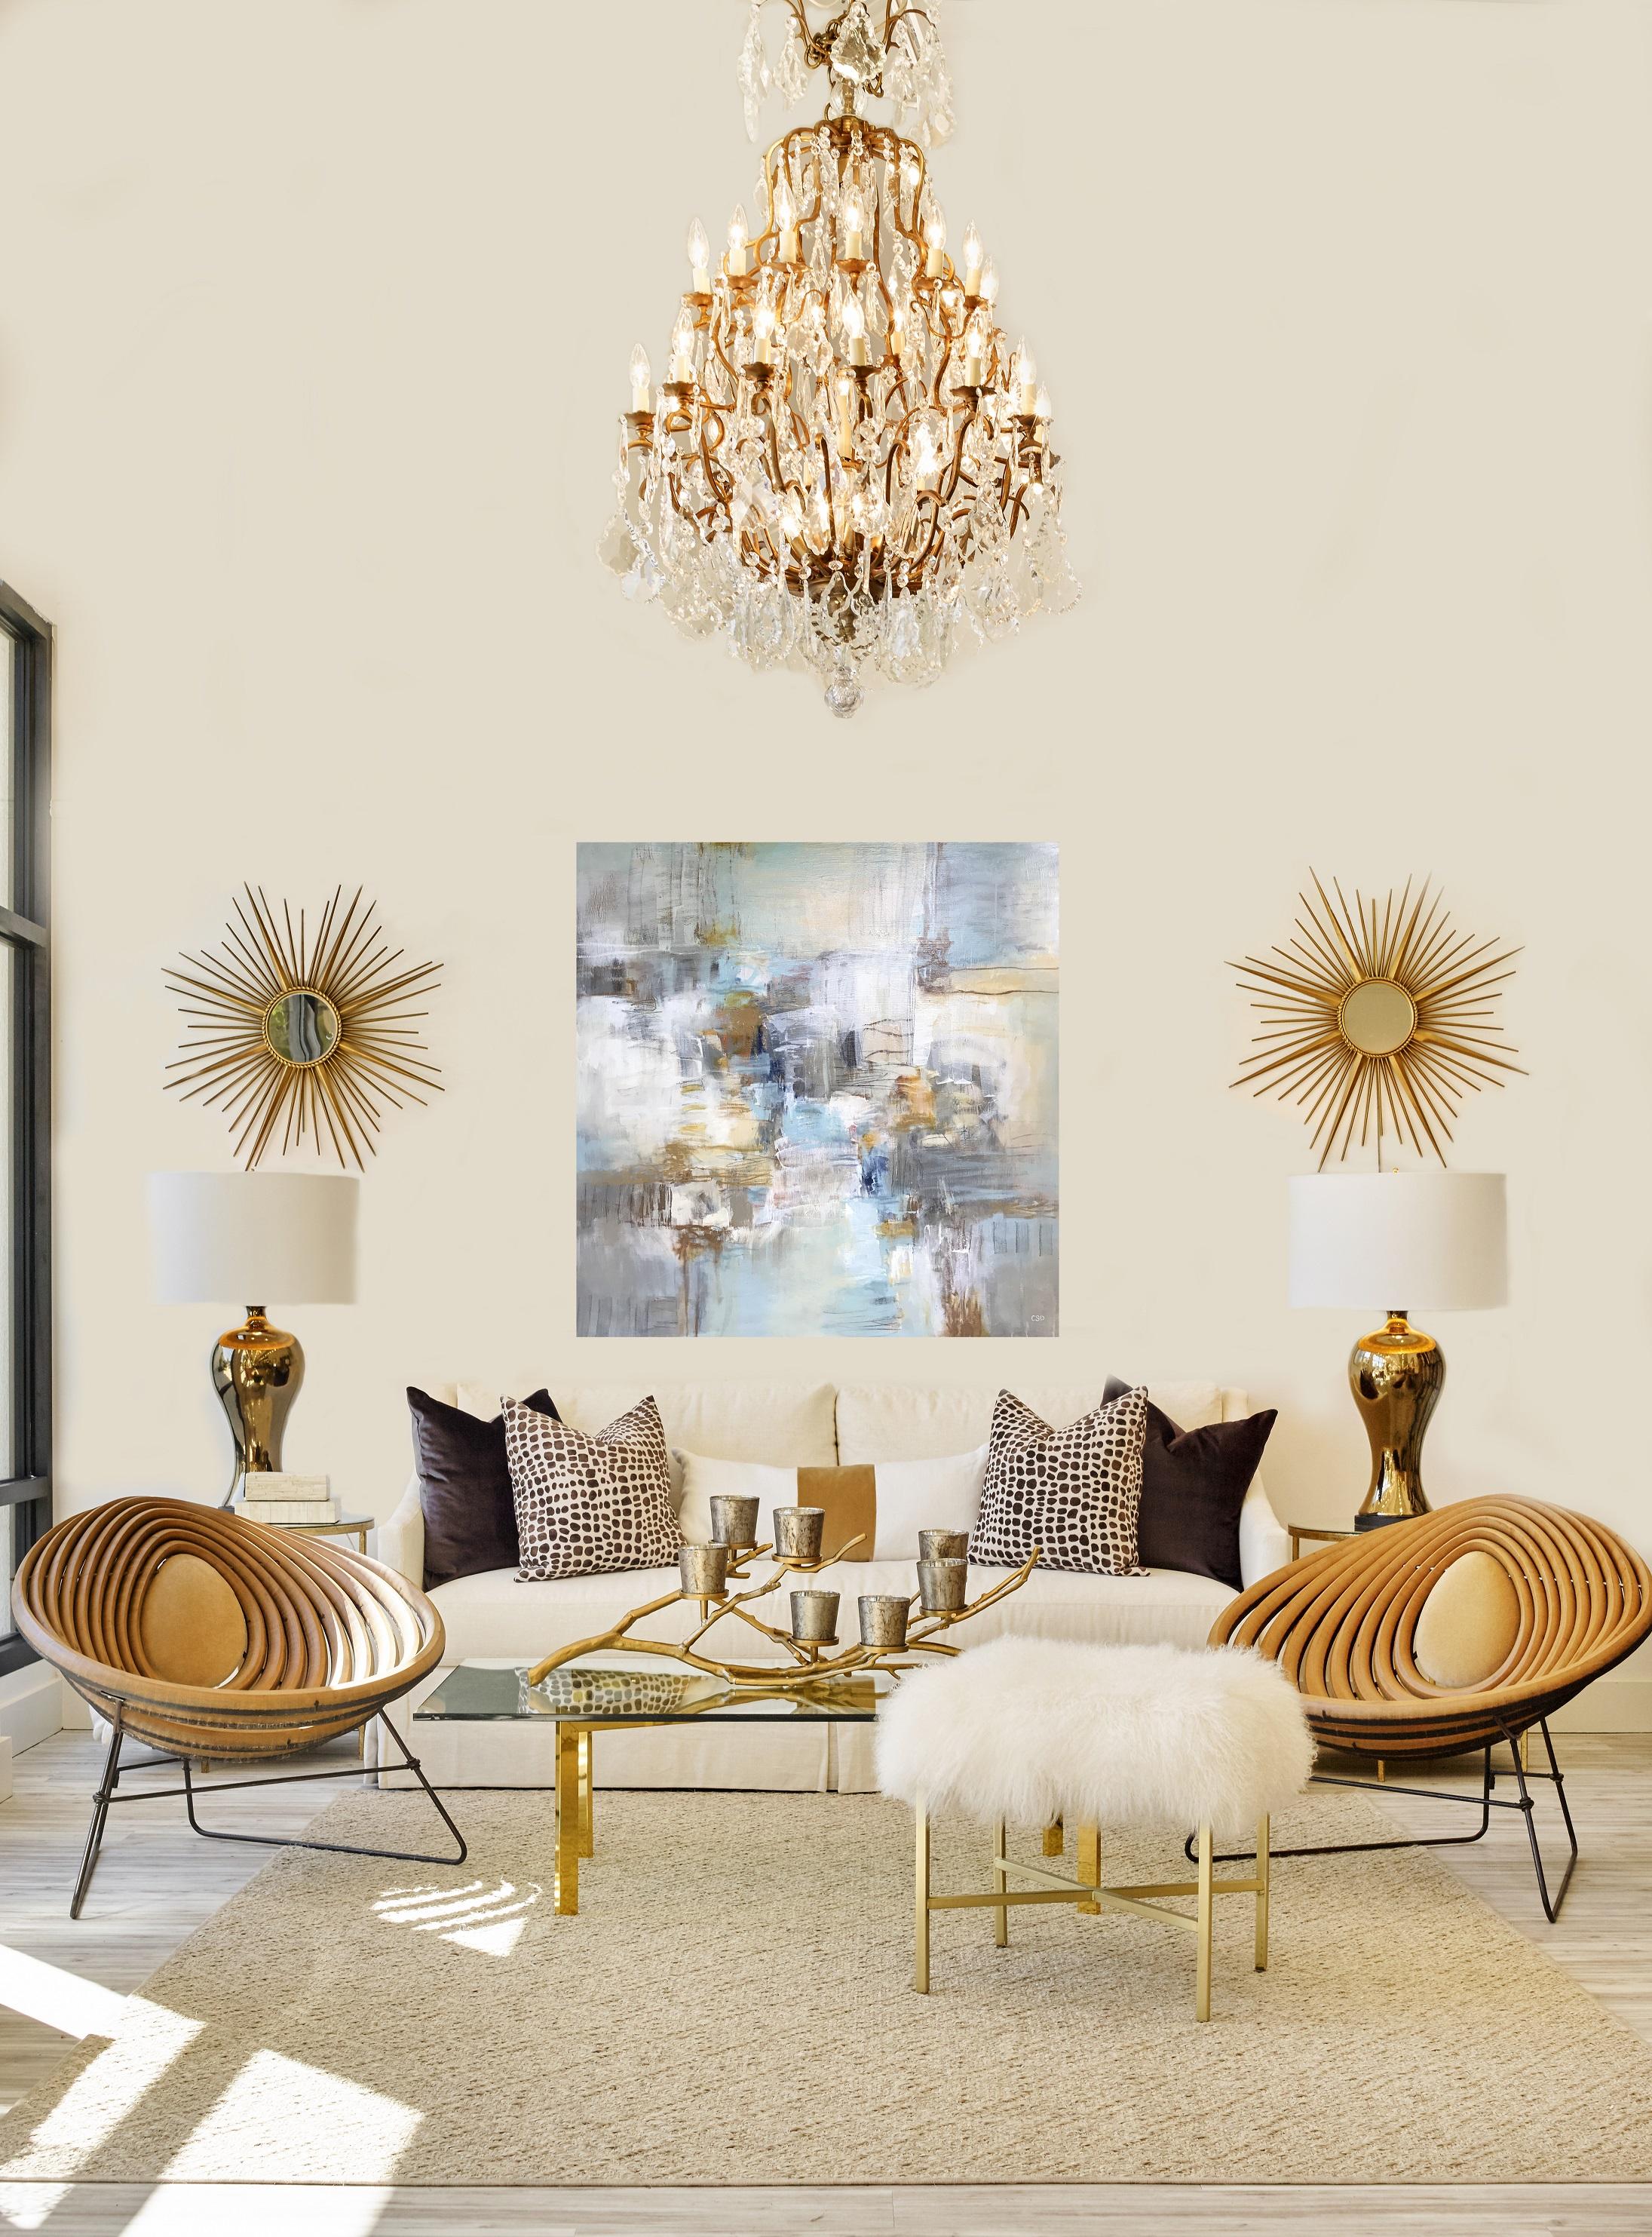 'Coastal Morning' is a large mixed media on canvas abstract painting created by American artist Christina Doelling in 2018. Featuring a soft palette mostly made of pale blue, white, beige and tan colors highlighted by golden accents, this square